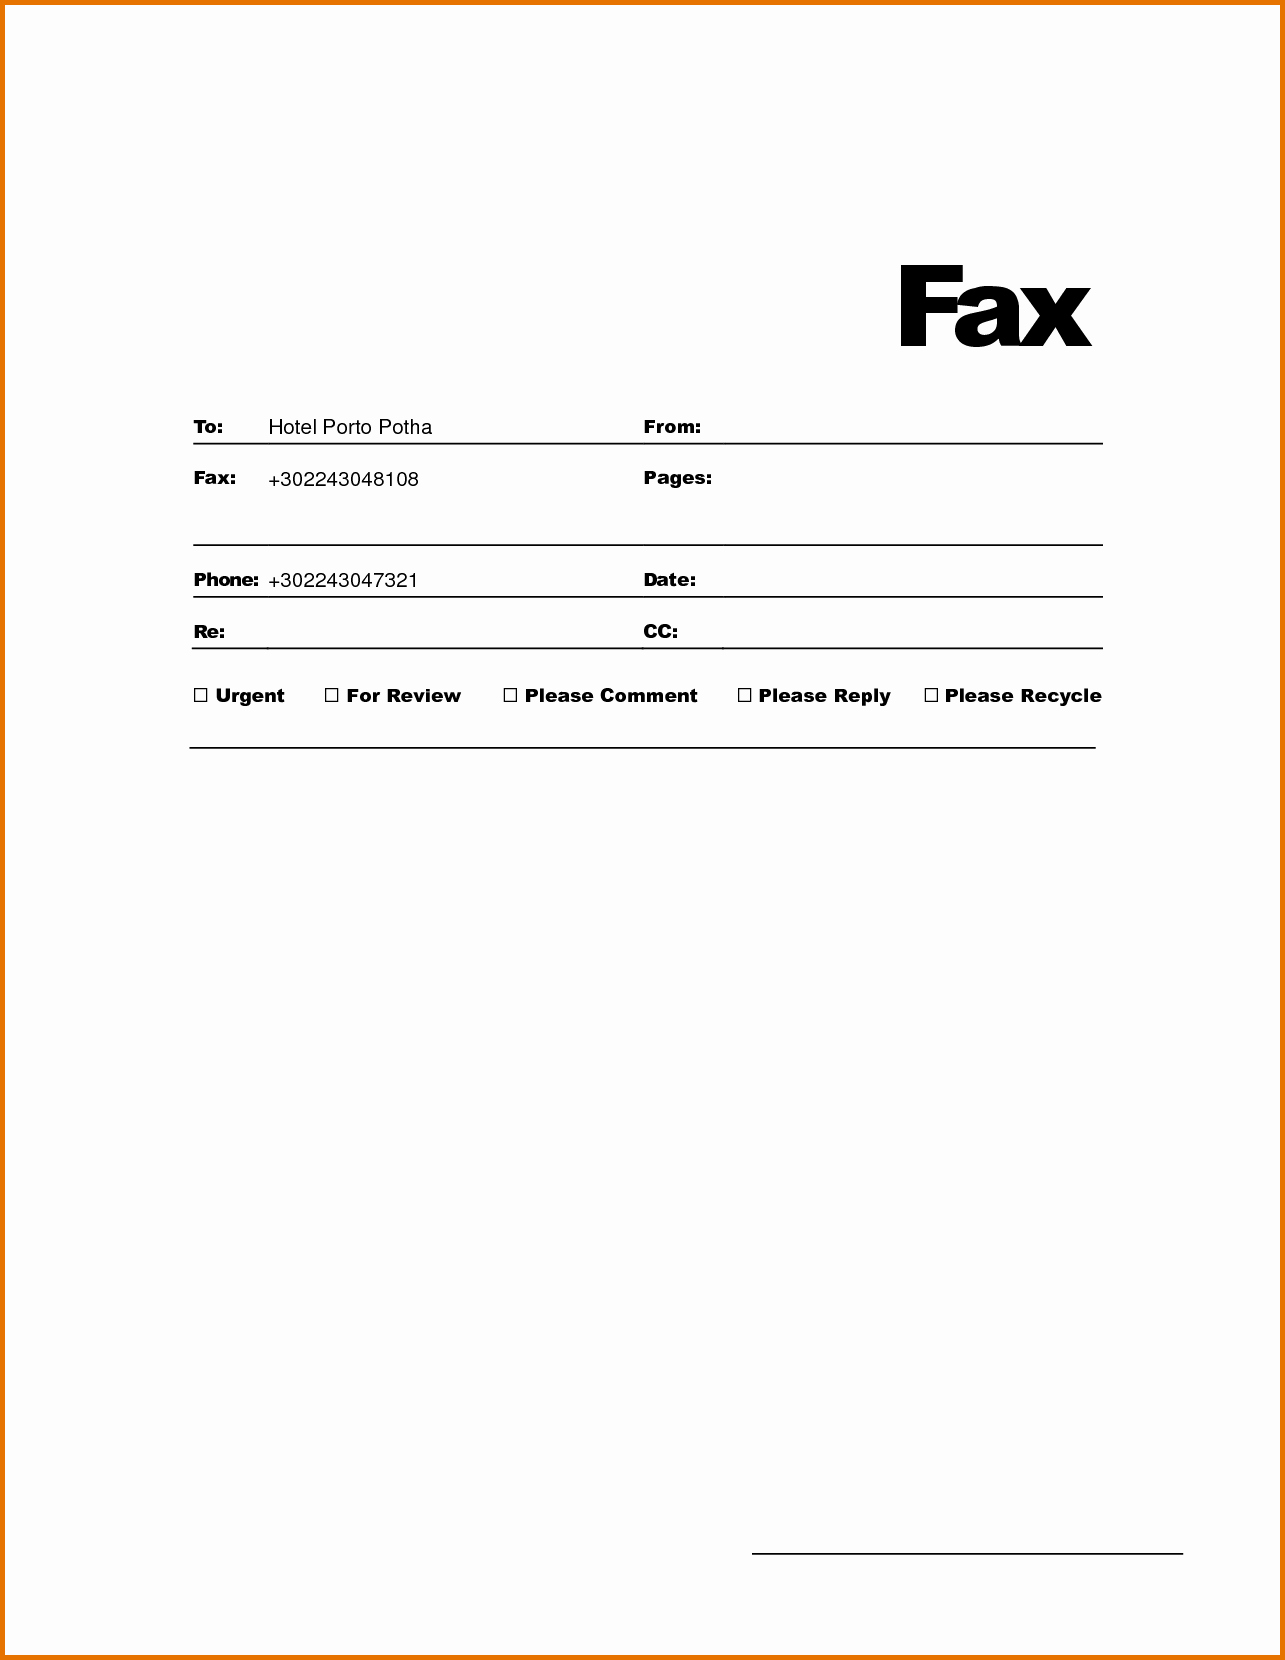 Fax Cover Sheet Template for Wordreference Letters Words